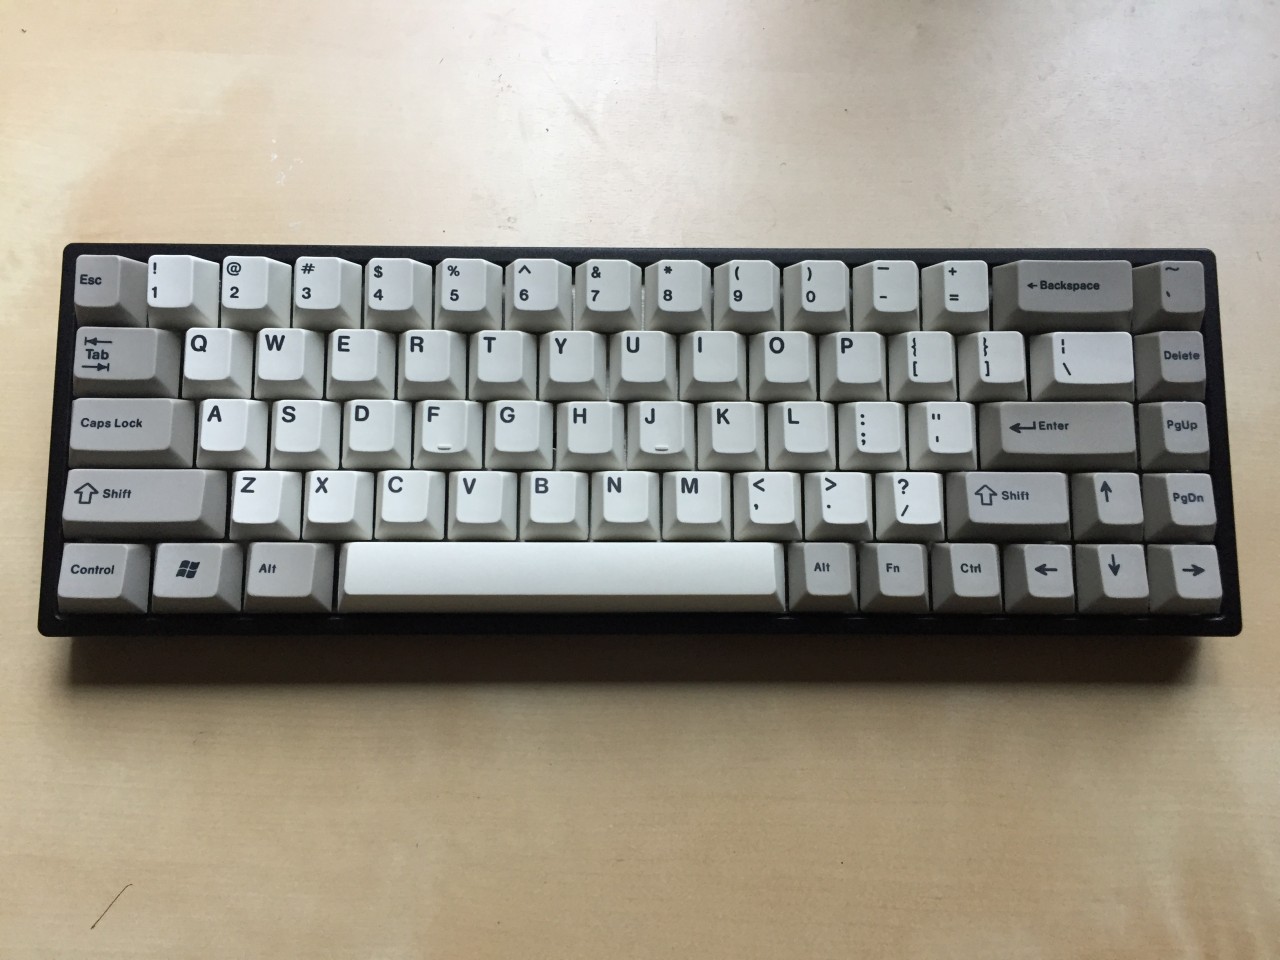 All keycaps are on, basic build complete!